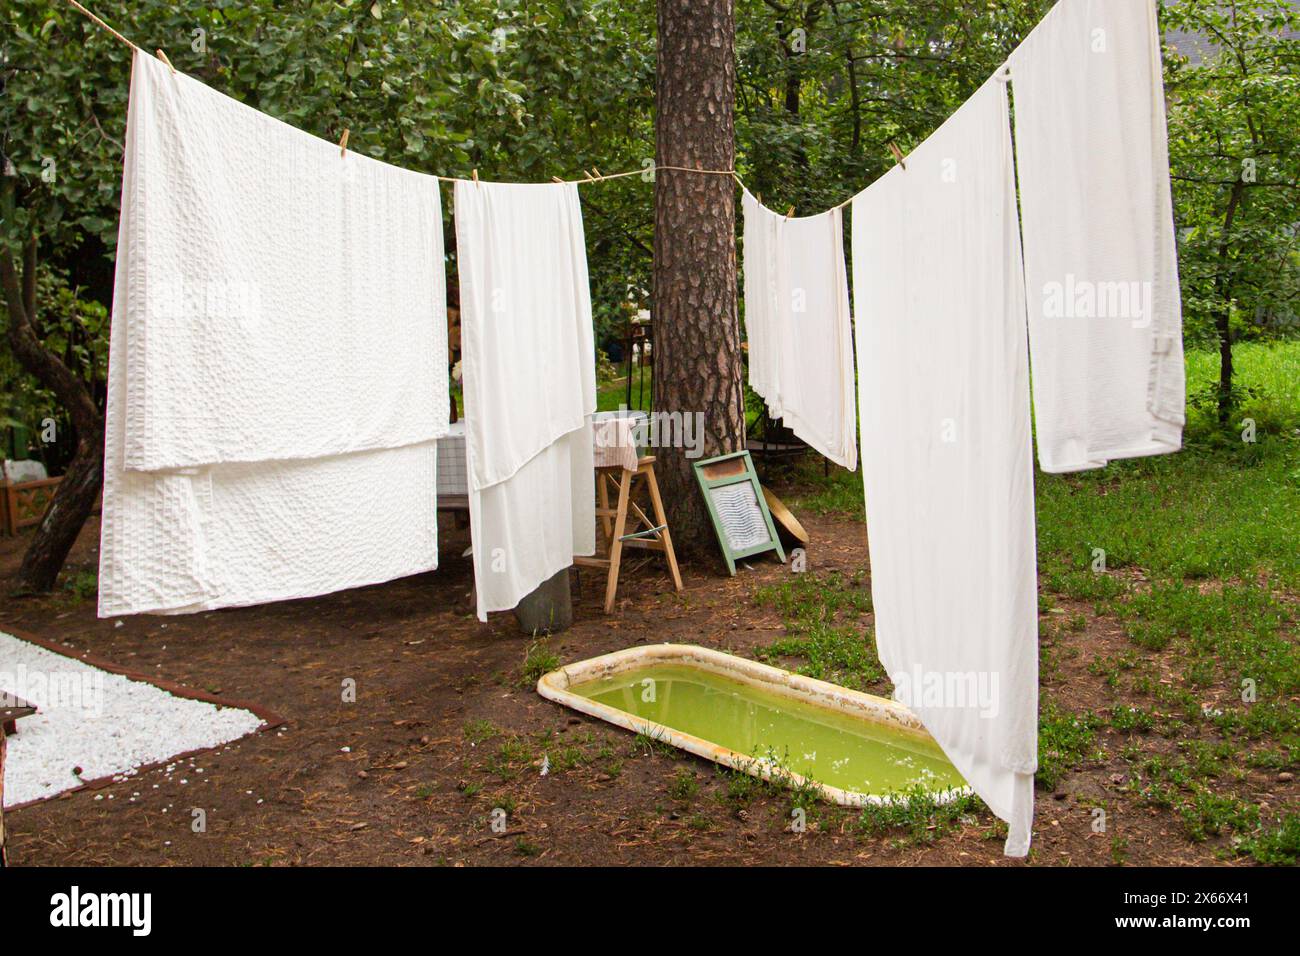 bed linen drying on a clothes line in the garden Stock Photo